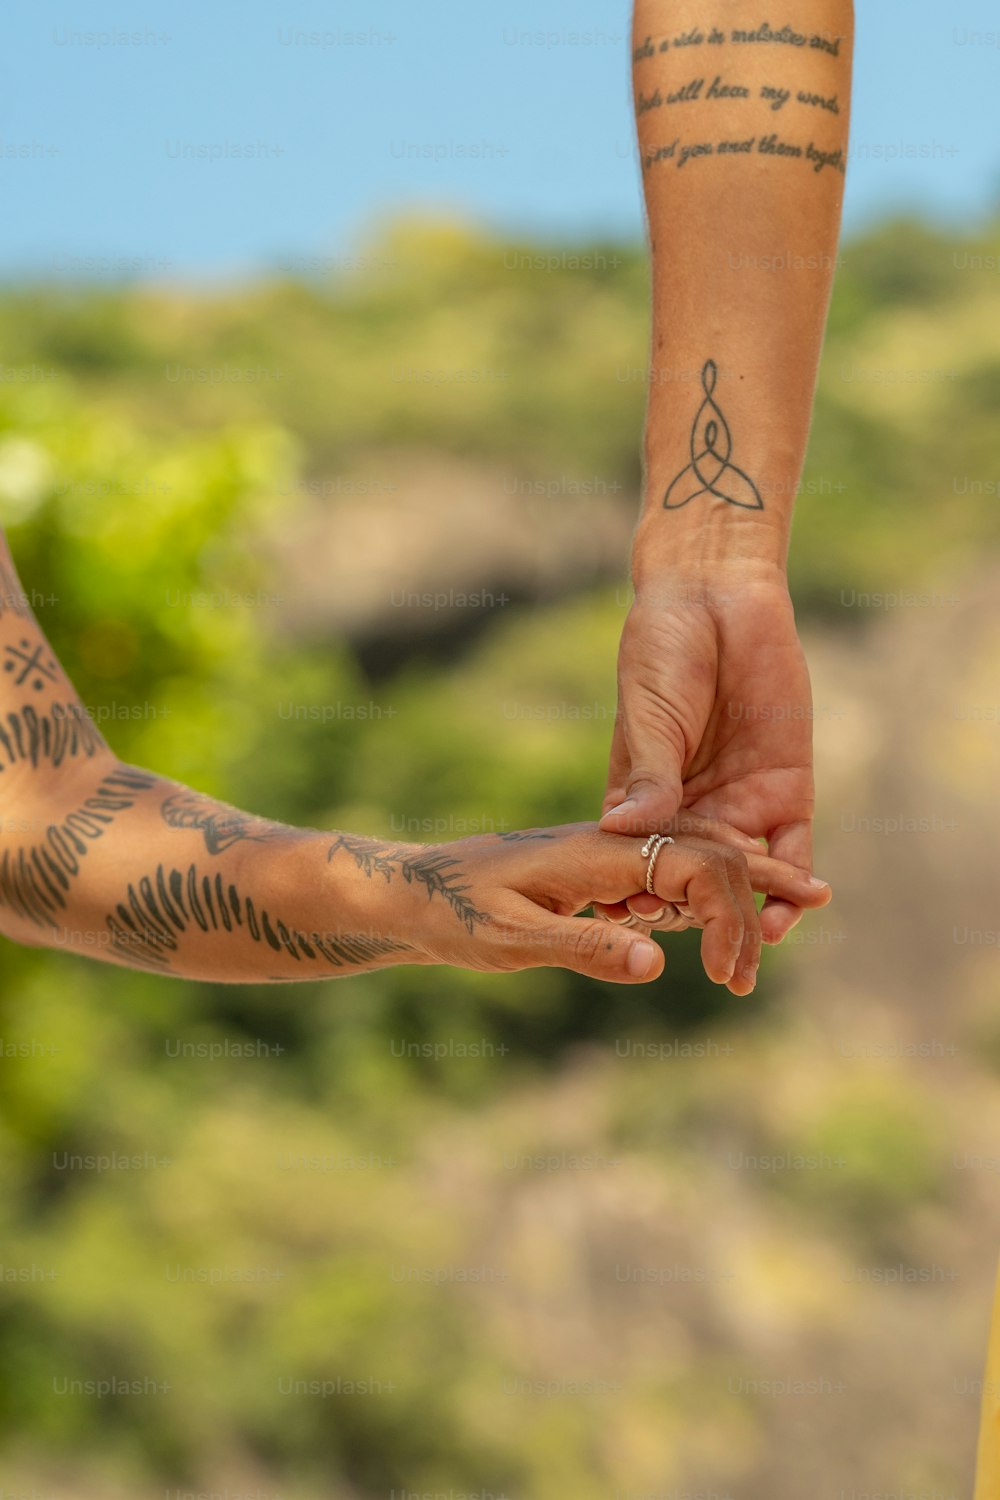 two people holding hands with tattoos on their arms